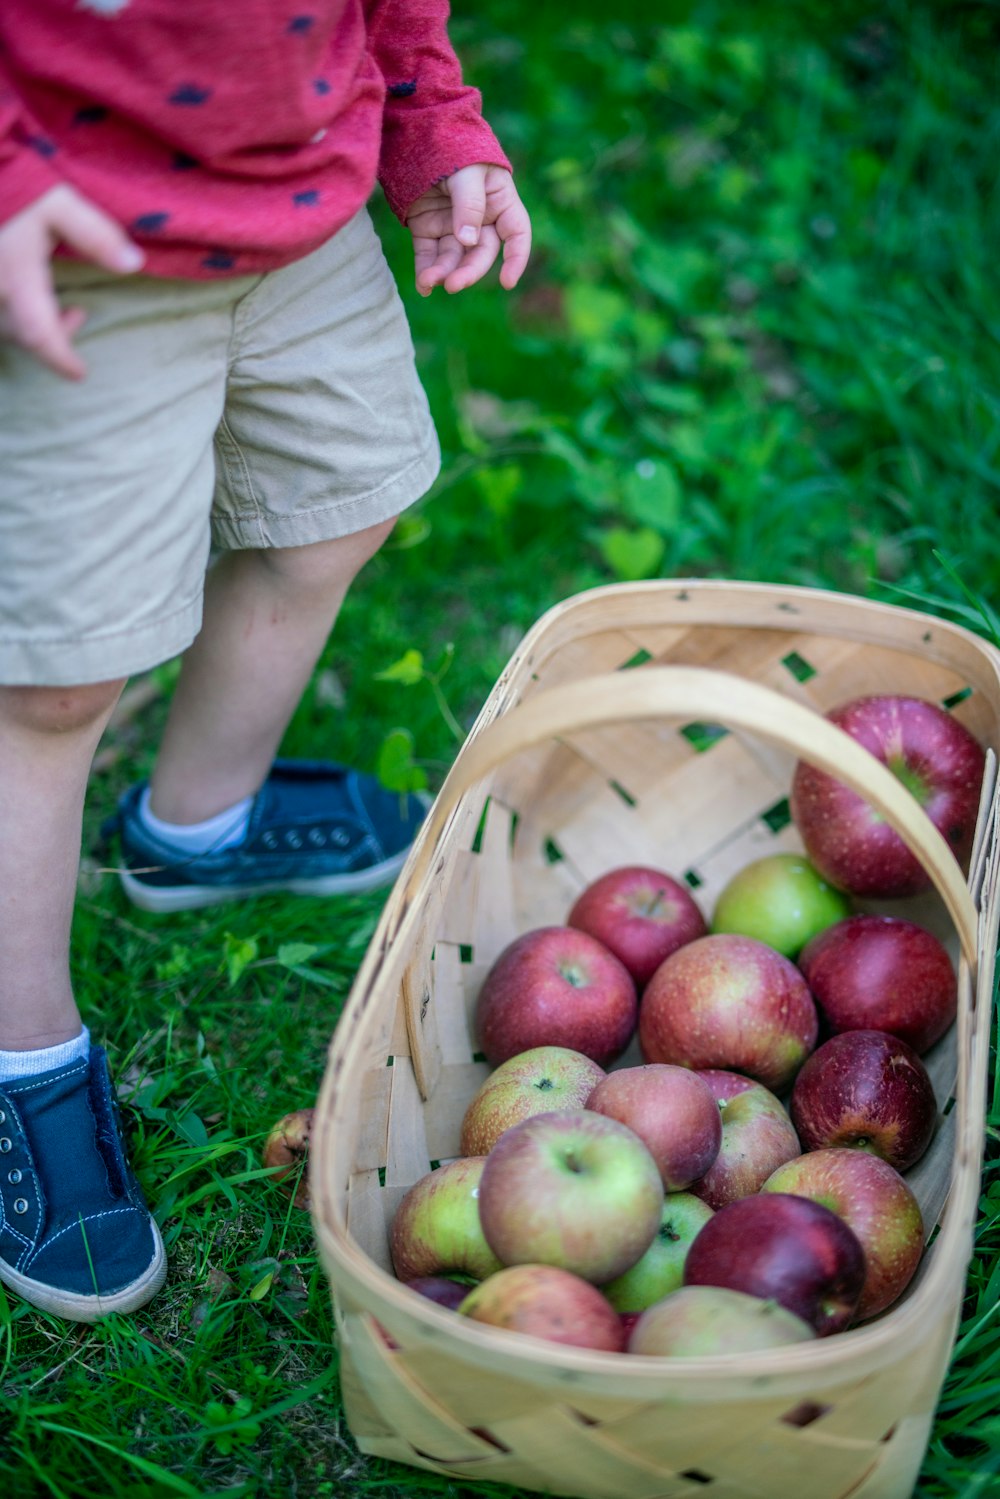 a child standing next to a basket of apples